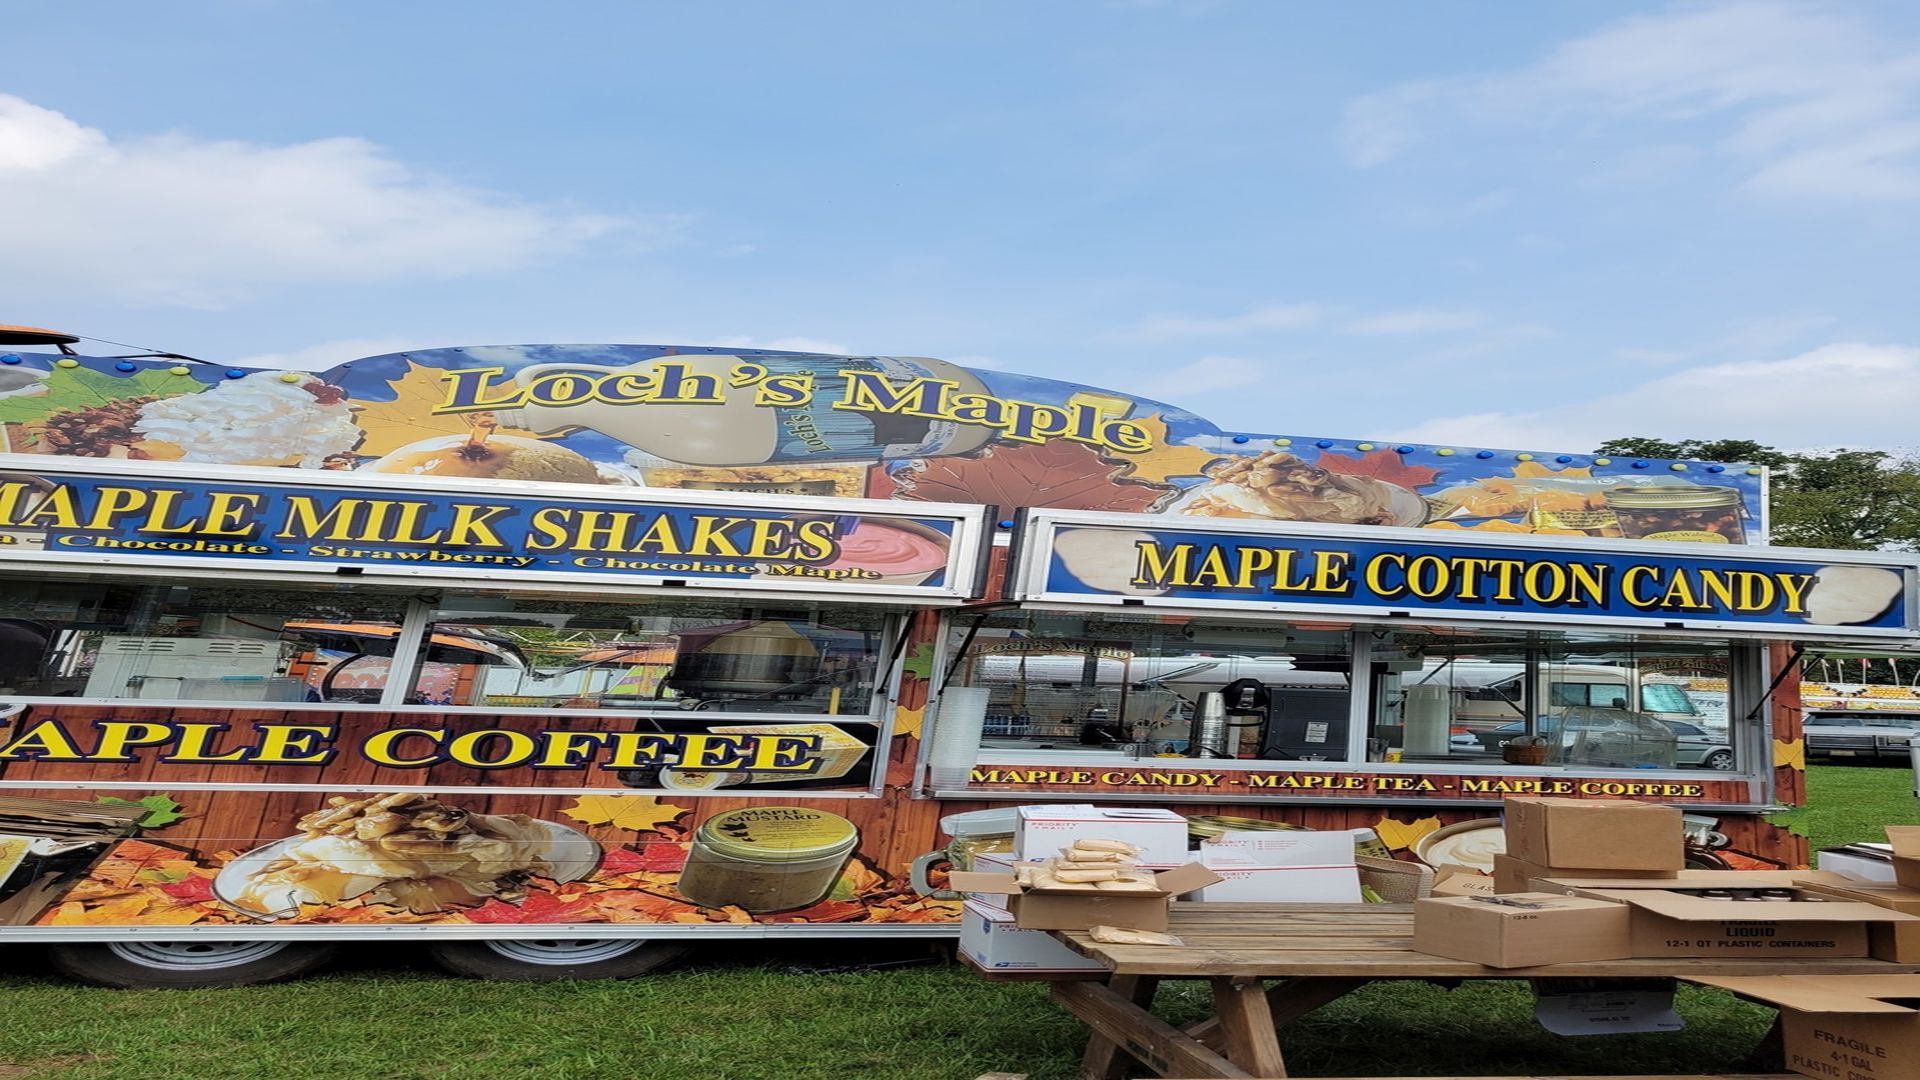 Loch's Maple 25th annual Open House, Springville Township, Pennsylvania, United States